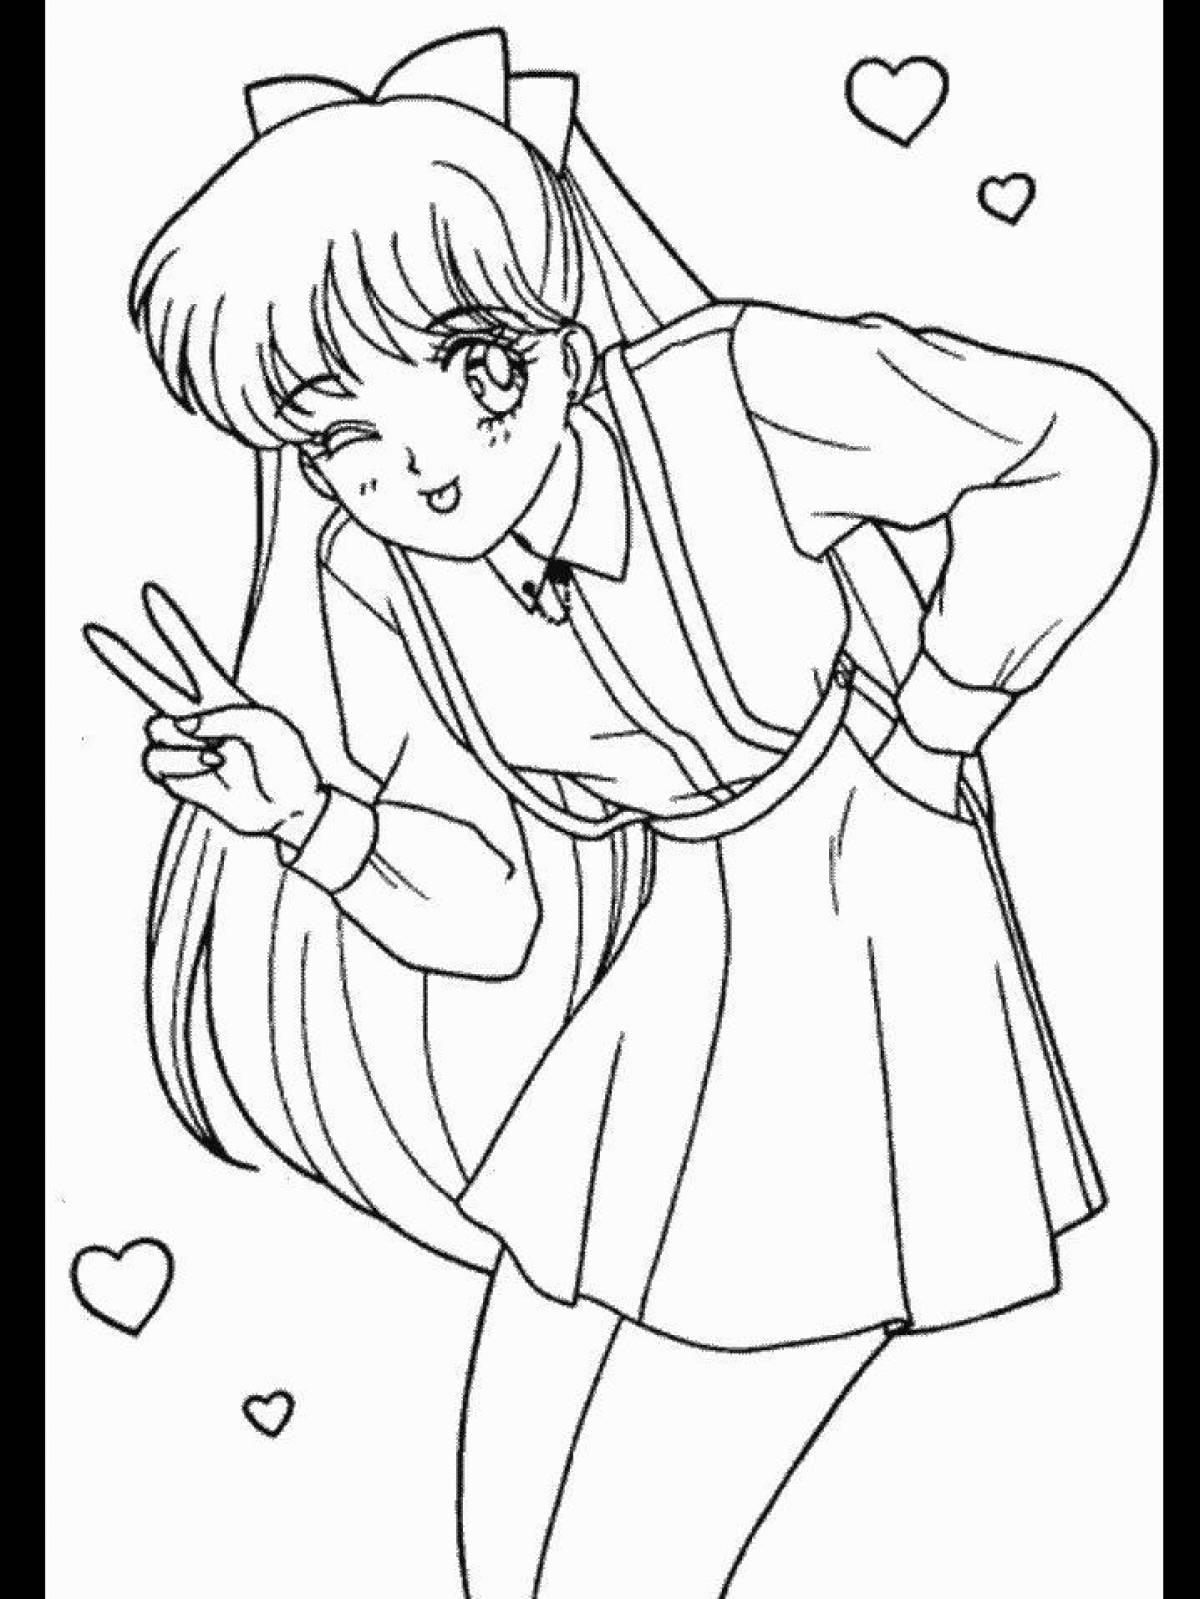 Updating anime coloring page